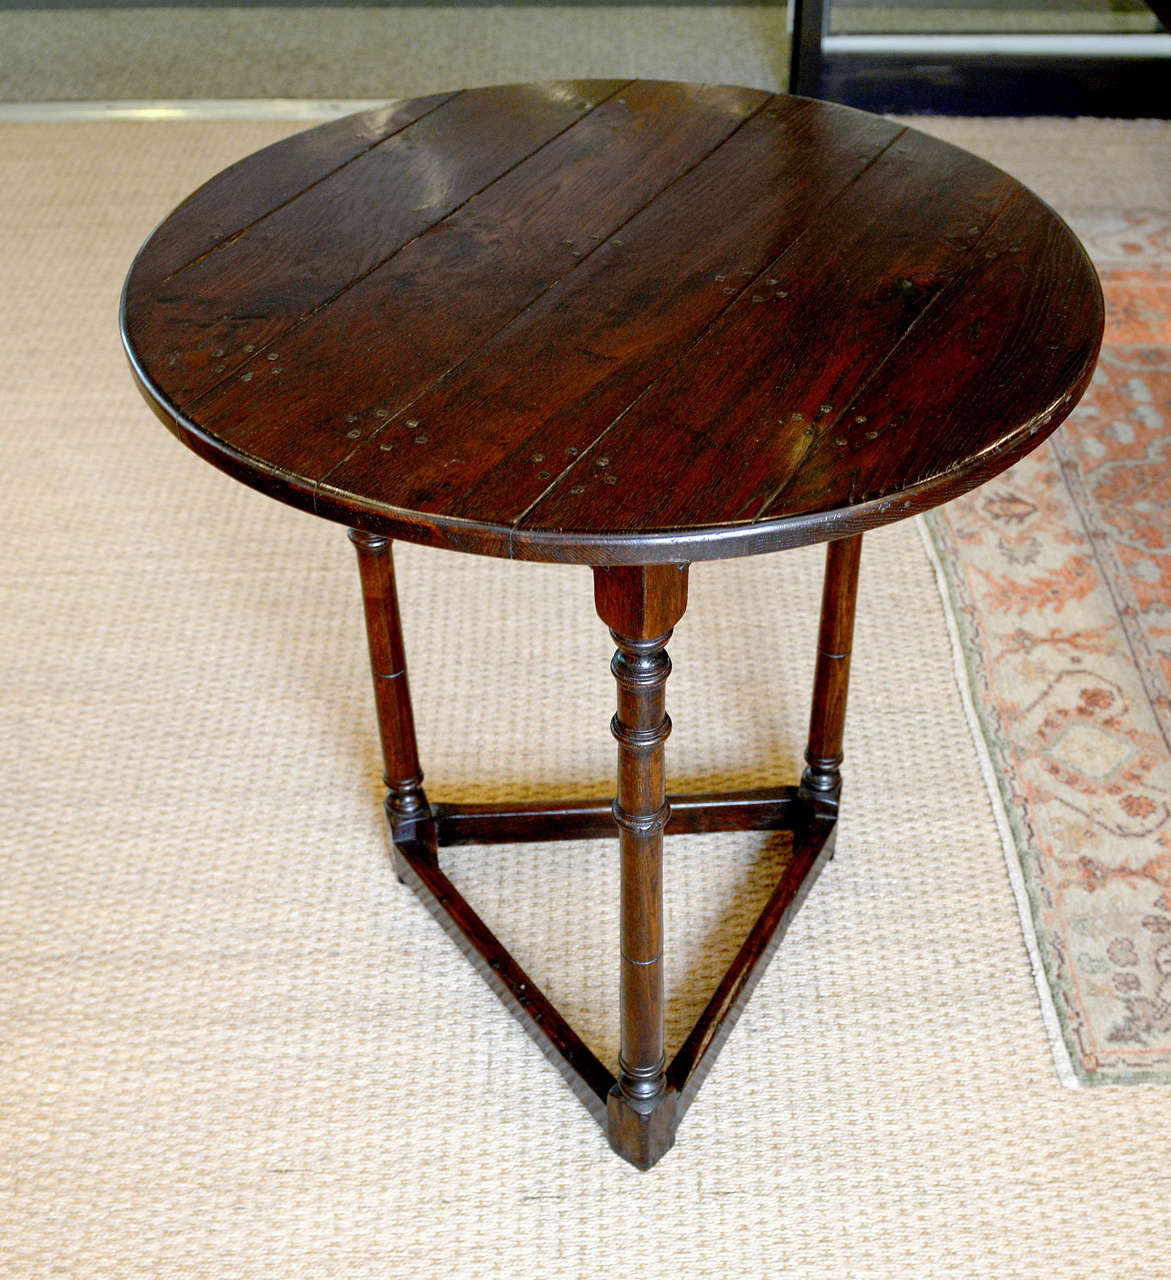 Poynings Clover Leaf Pub Table In Excellent Condition For Sale In Atlanta, GA